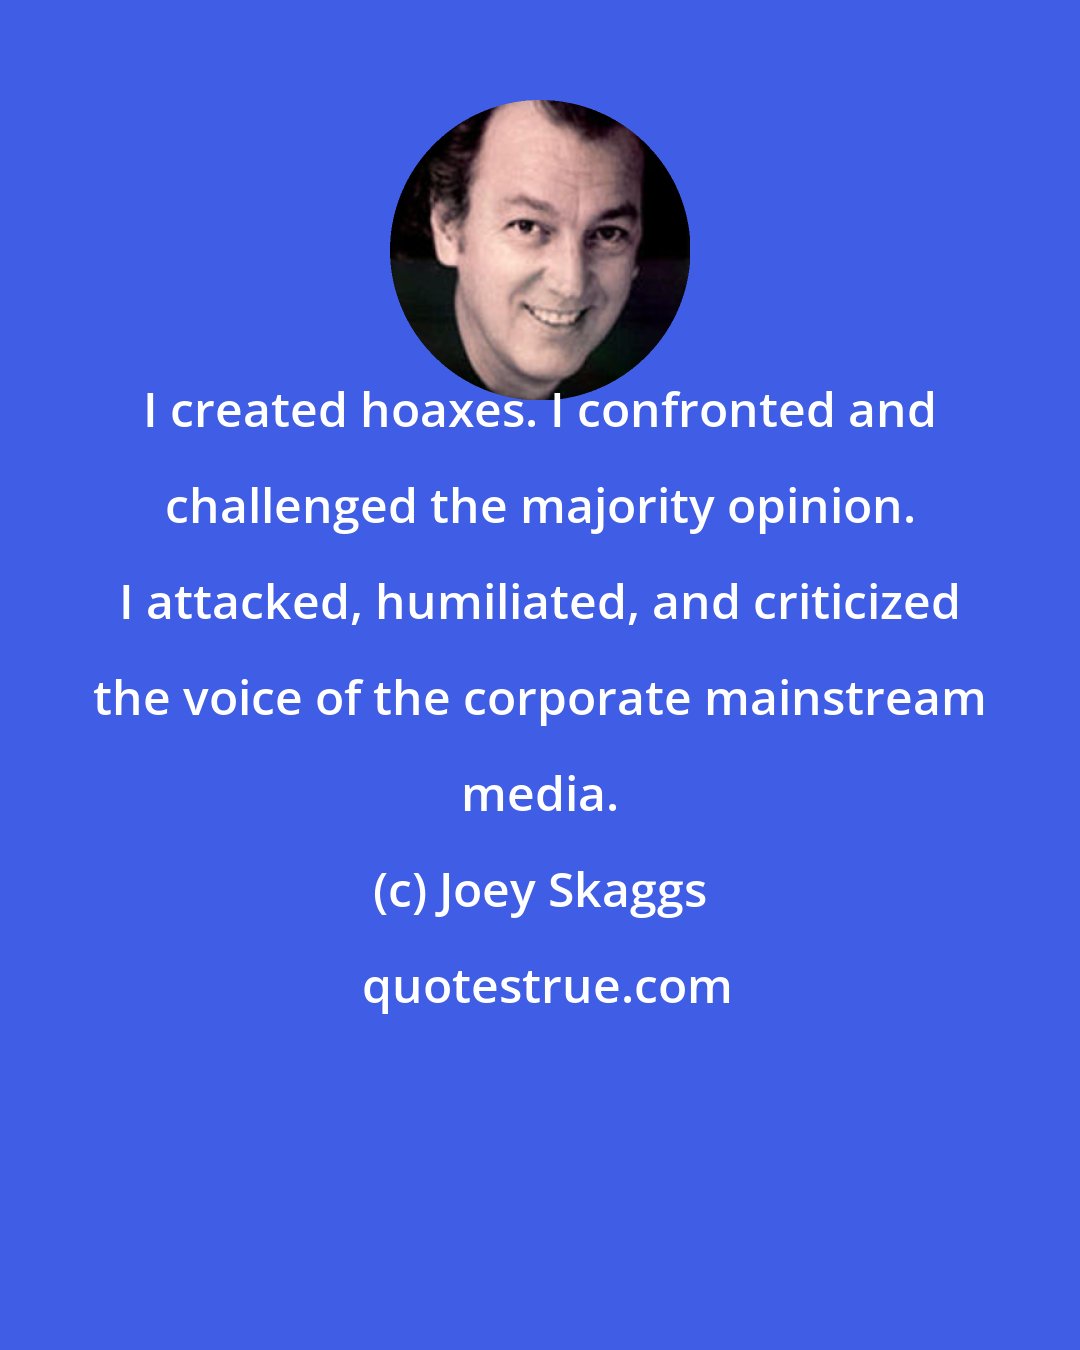 Joey Skaggs: I created hoaxes. I confronted and challenged the majority opinion. I attacked, humiliated, and criticized the voice of the corporate mainstream media.